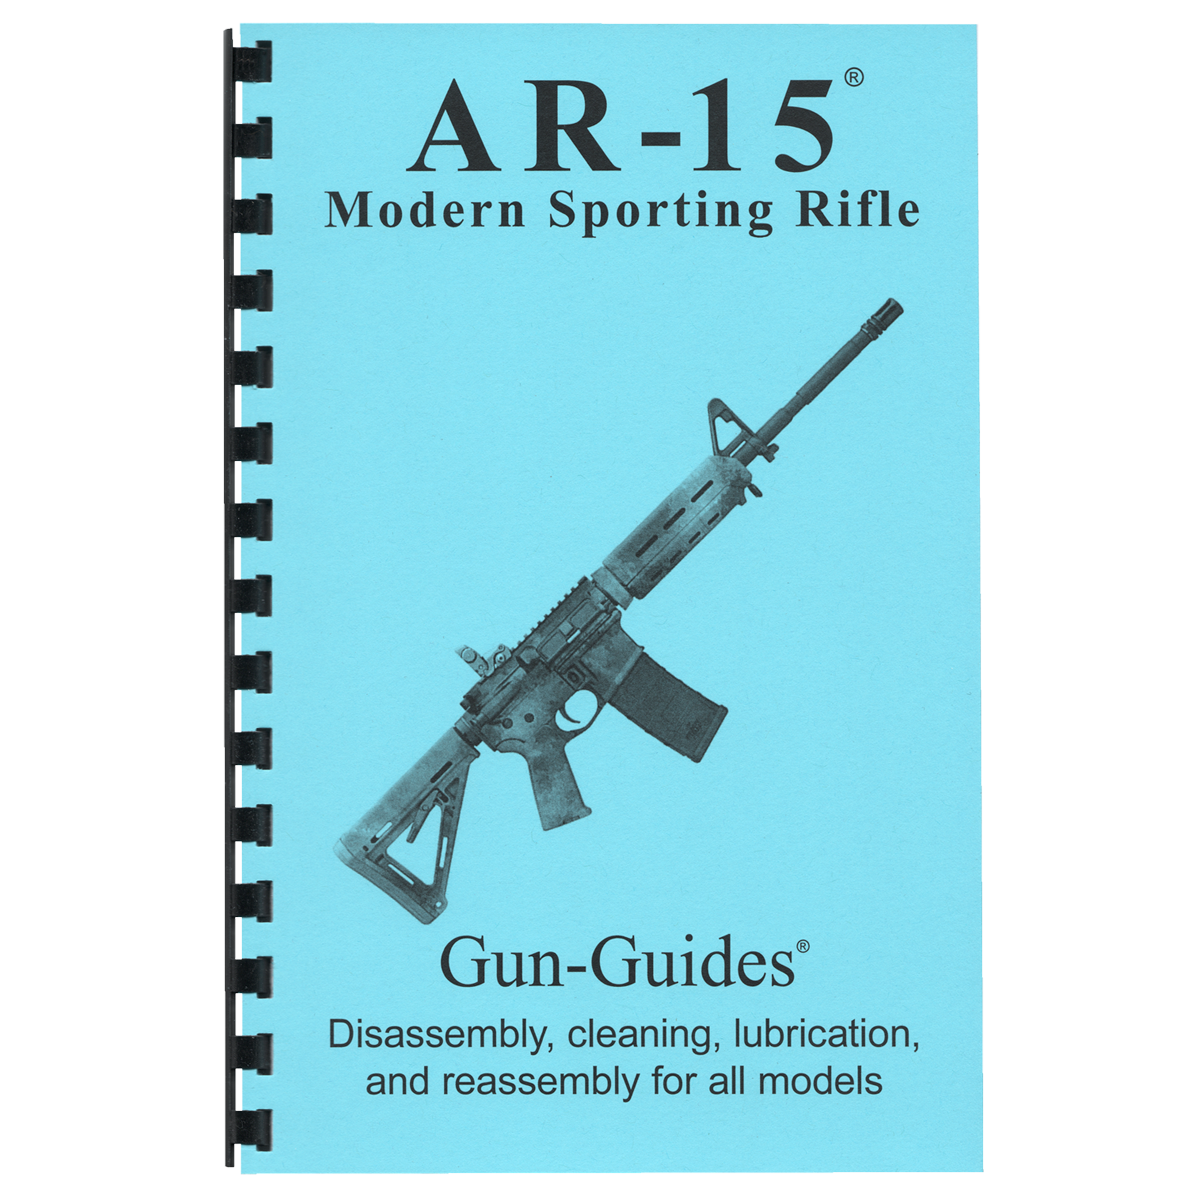 AR-15 Modern Sporting Rifle Gun-Guides® Disassembly, cleaning, lubrication and reassembly for all models.